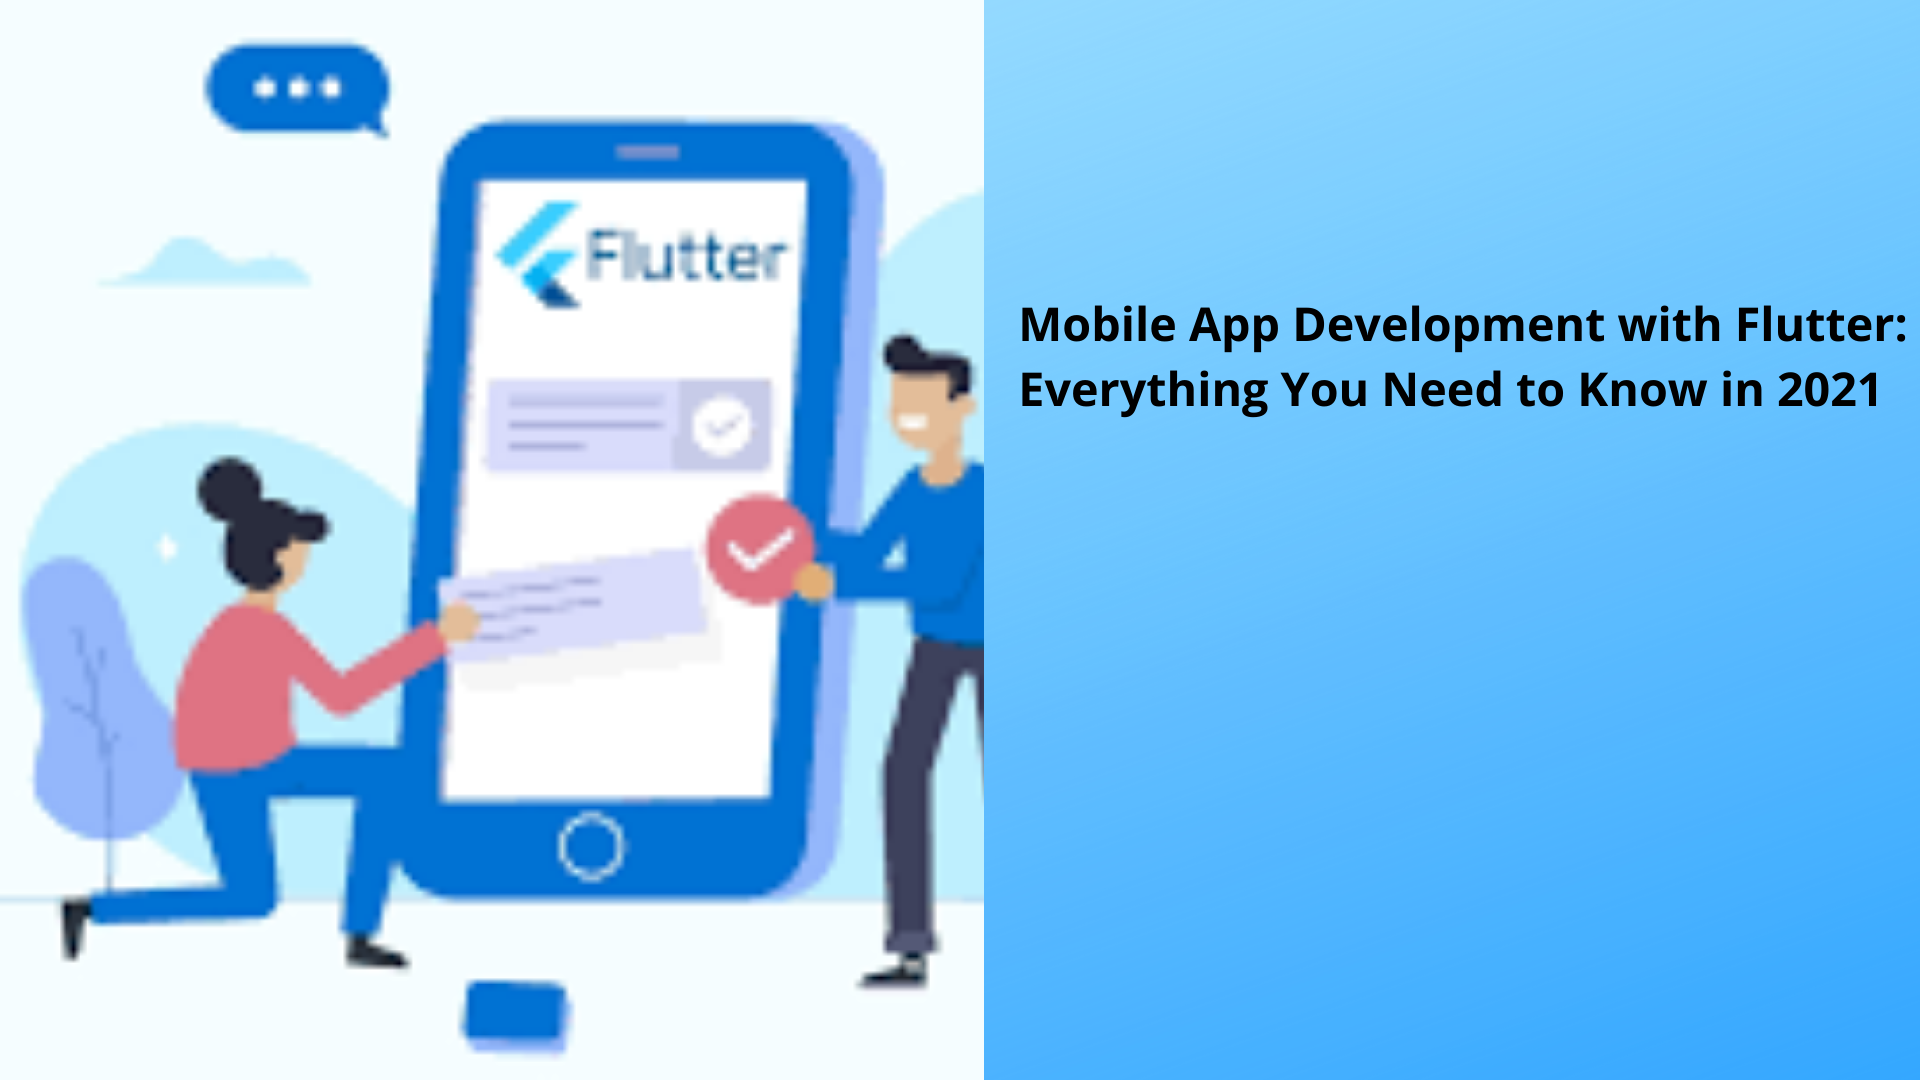 Mobile App Development with Flutter: Everything You Need to Know in 2021